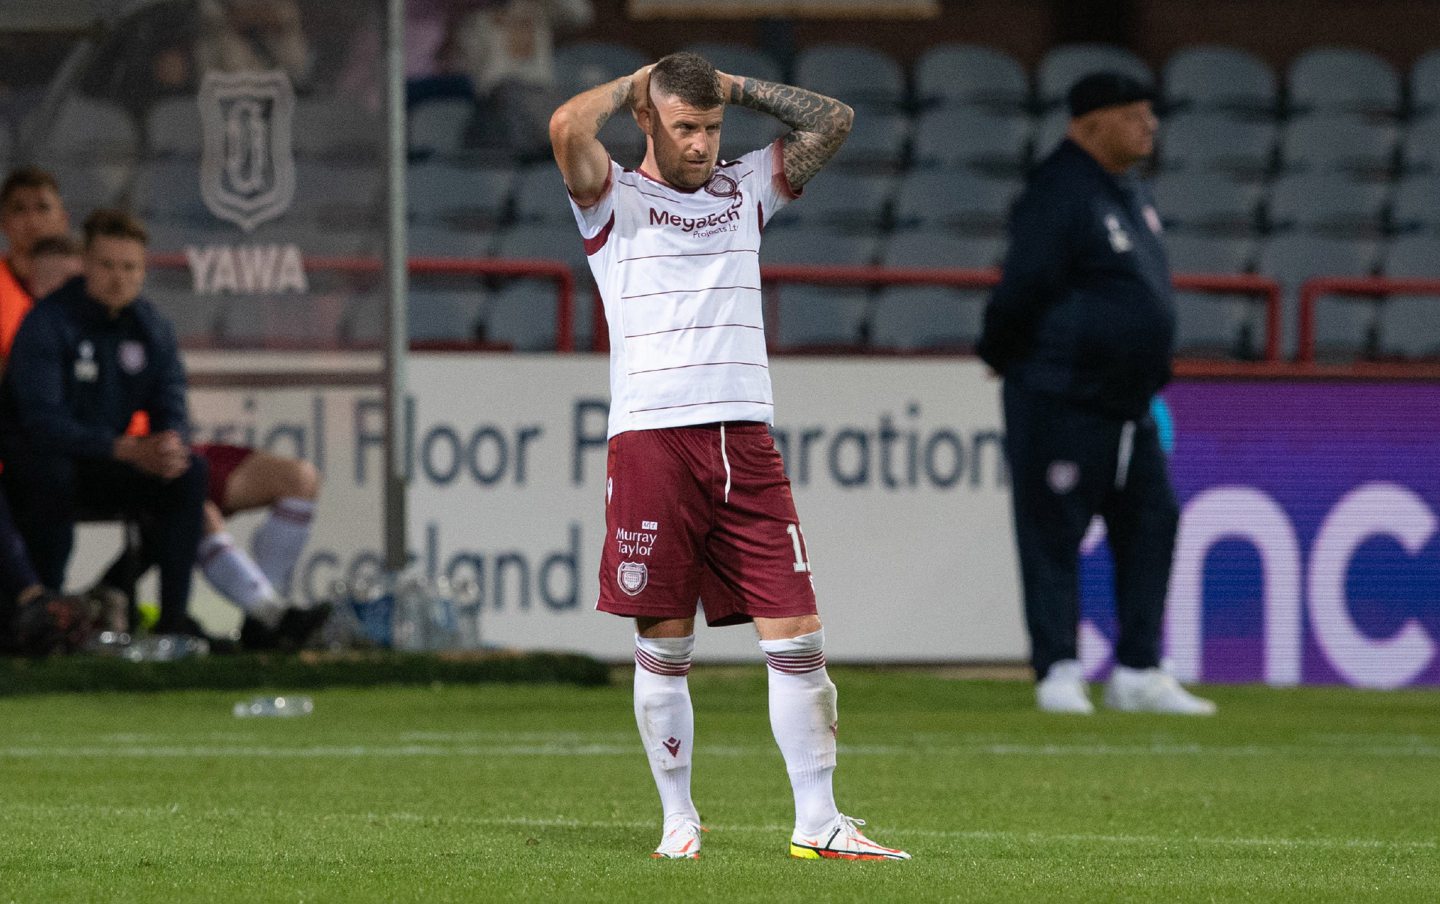 Arbroath hero Bobby Linn and boss Dick Campbell exchanged words after he was replaced on 65 minutes. Image: SNS